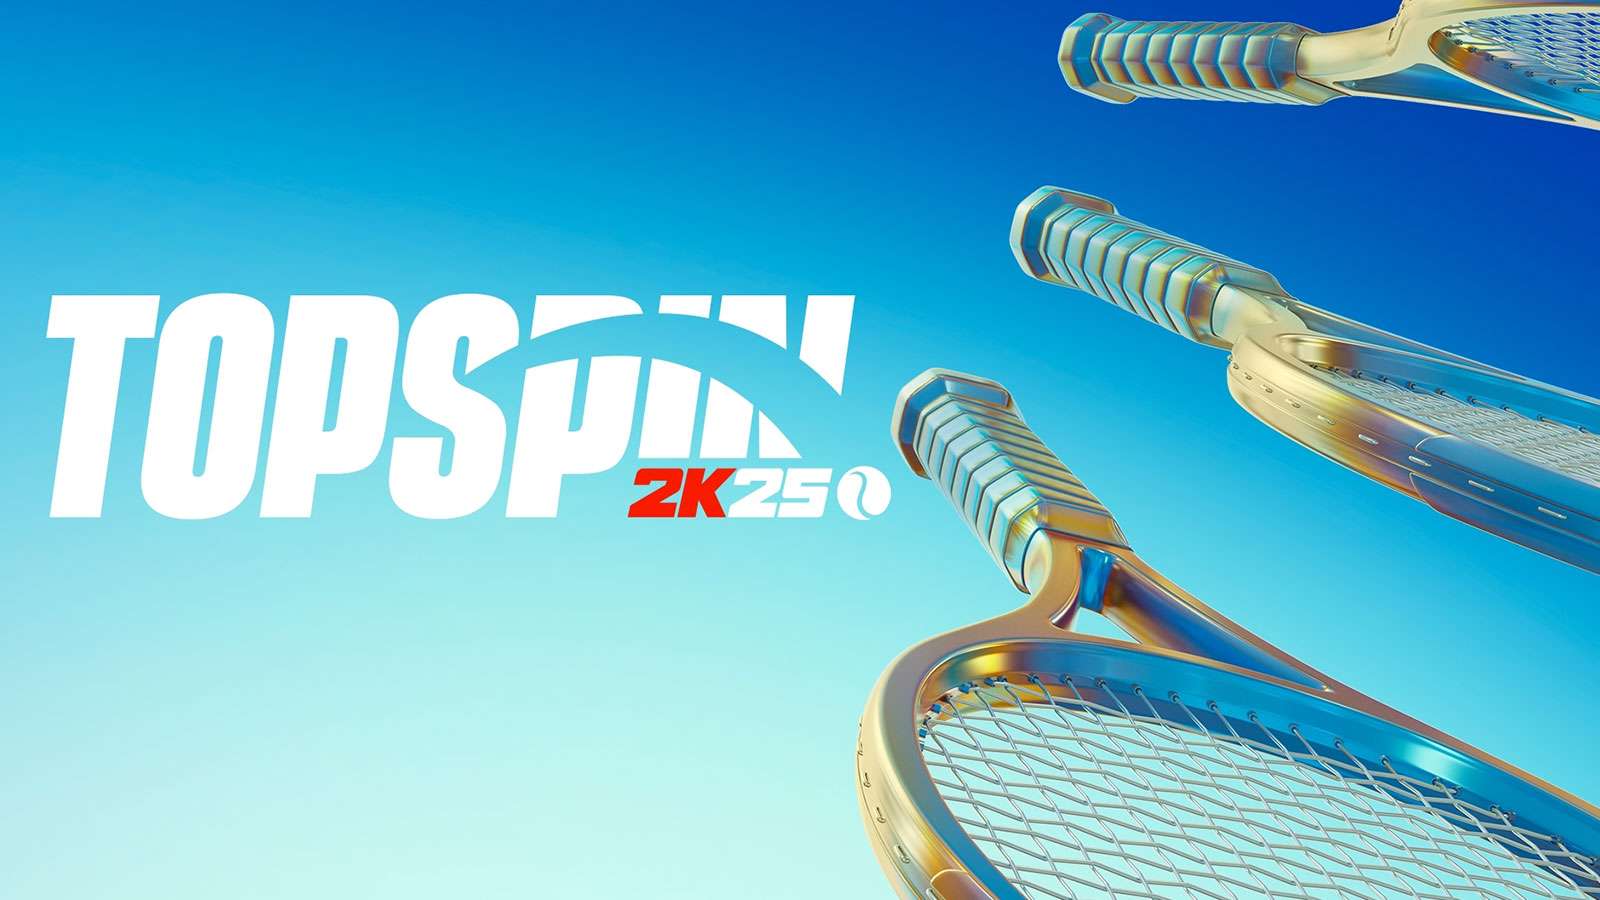 TopSpin 2K25 raquettes